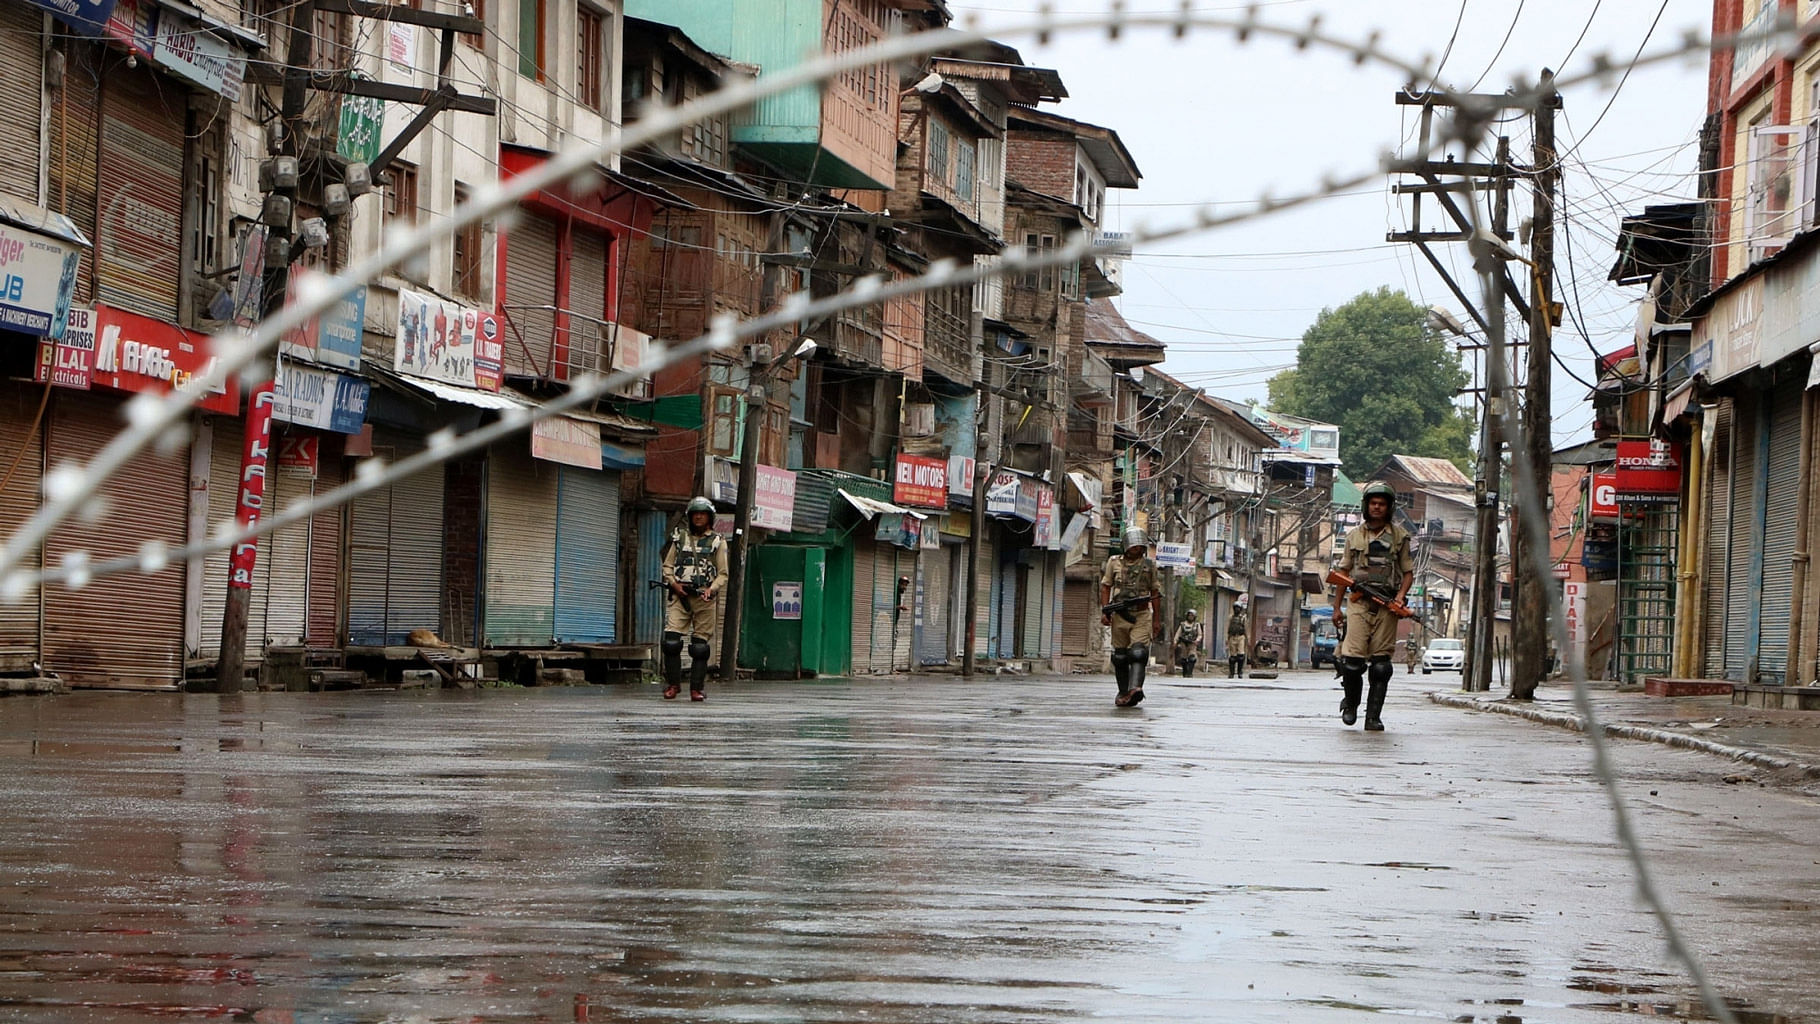 File photo of streets of Kashmir under curfew. (Photo: IANS)